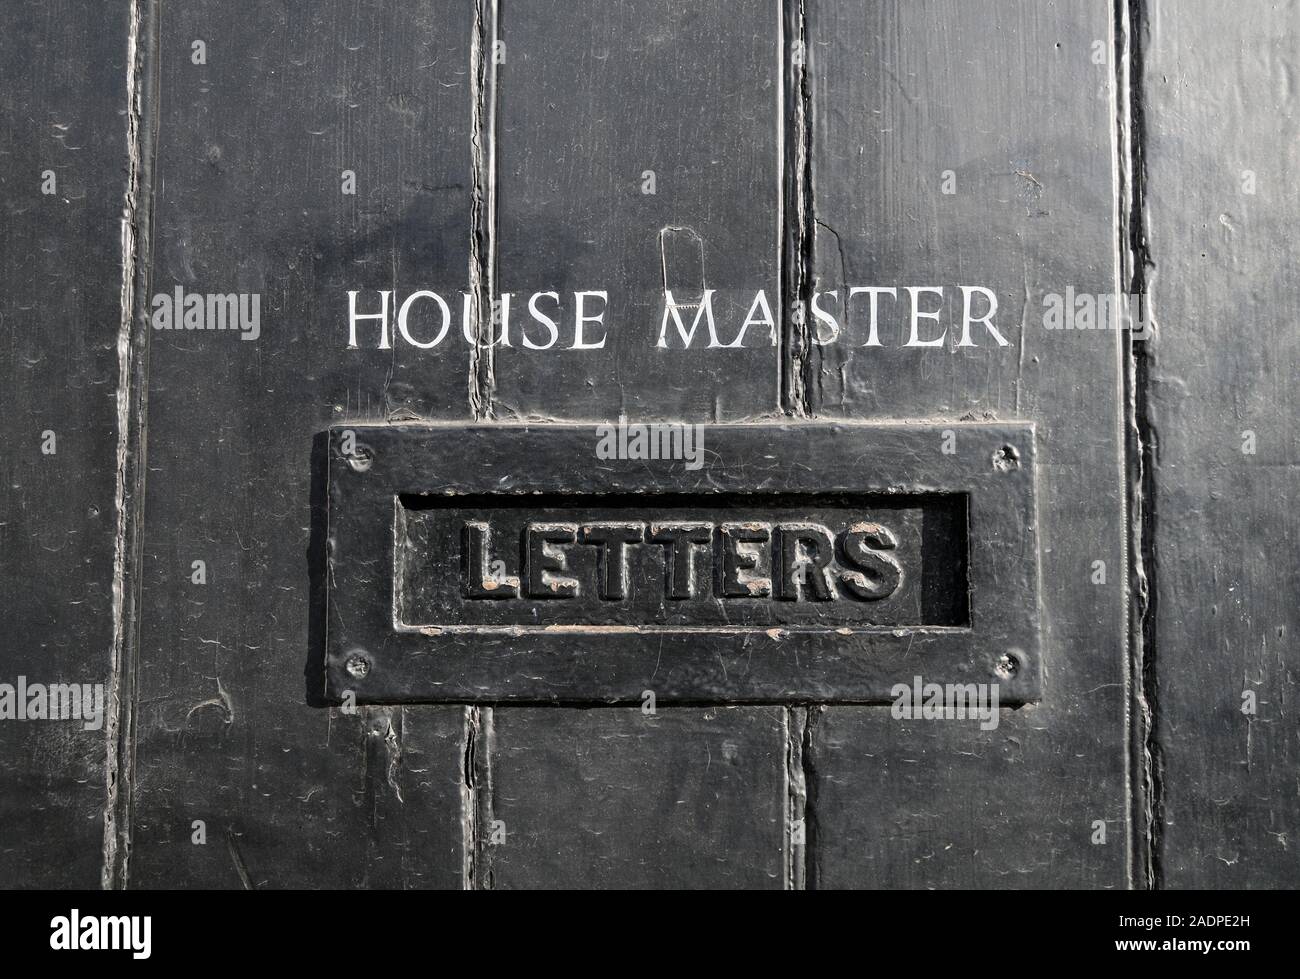 The black door and letterbox of a House Master at the prestigious Eton College, UK Stock Photo